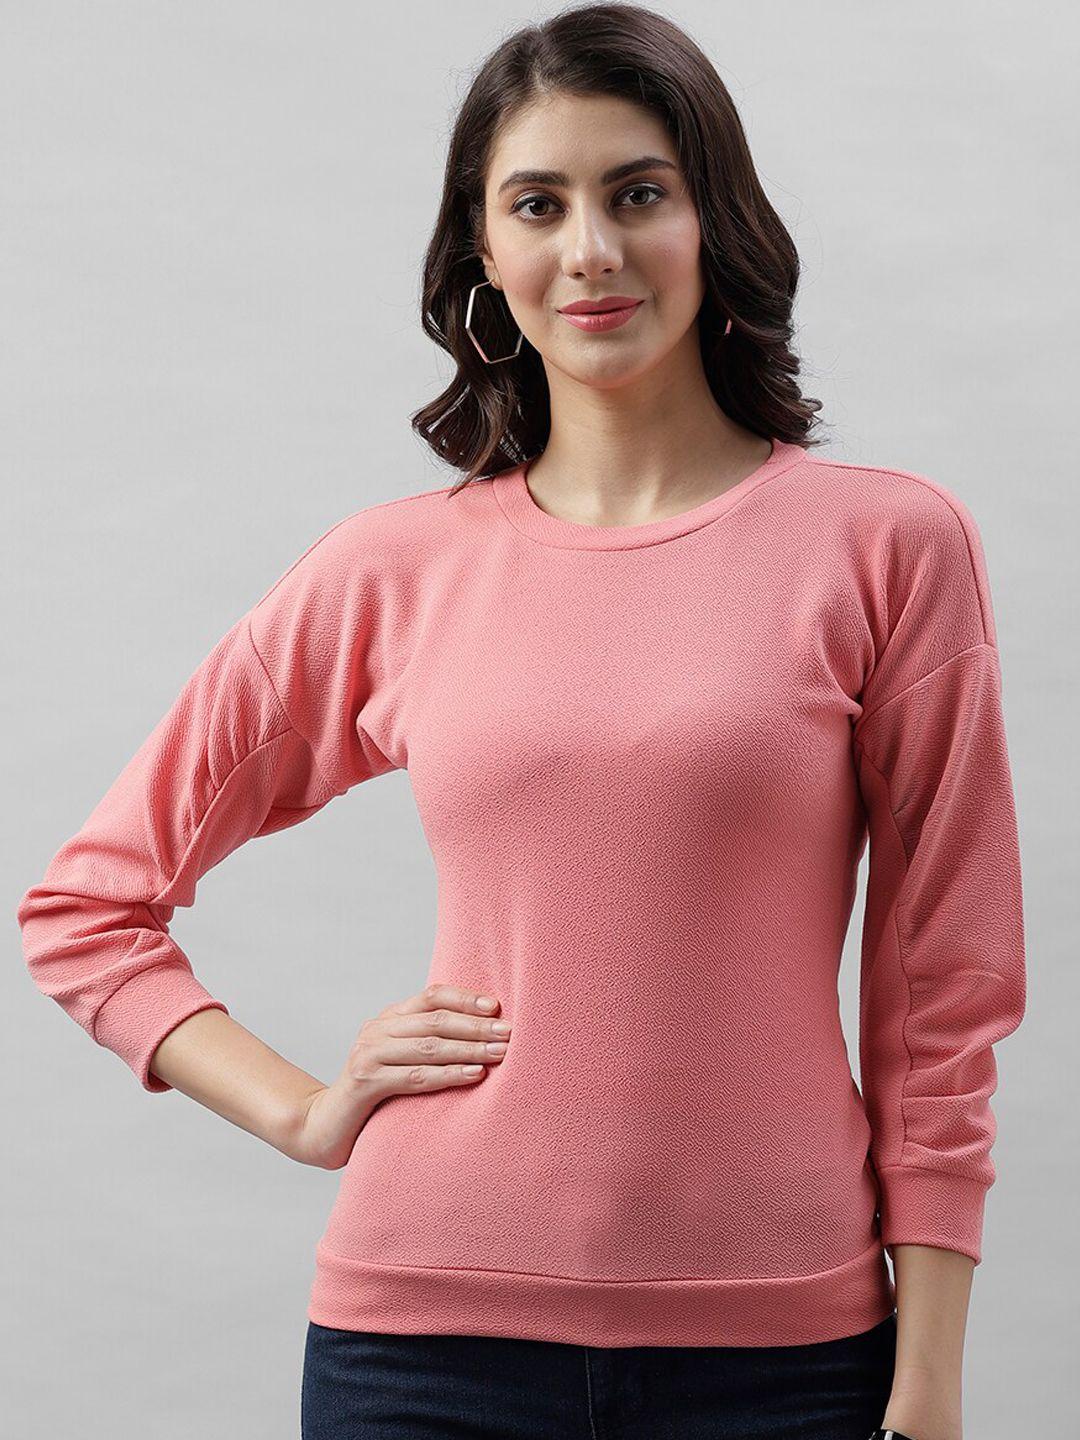 athena women pink solid top